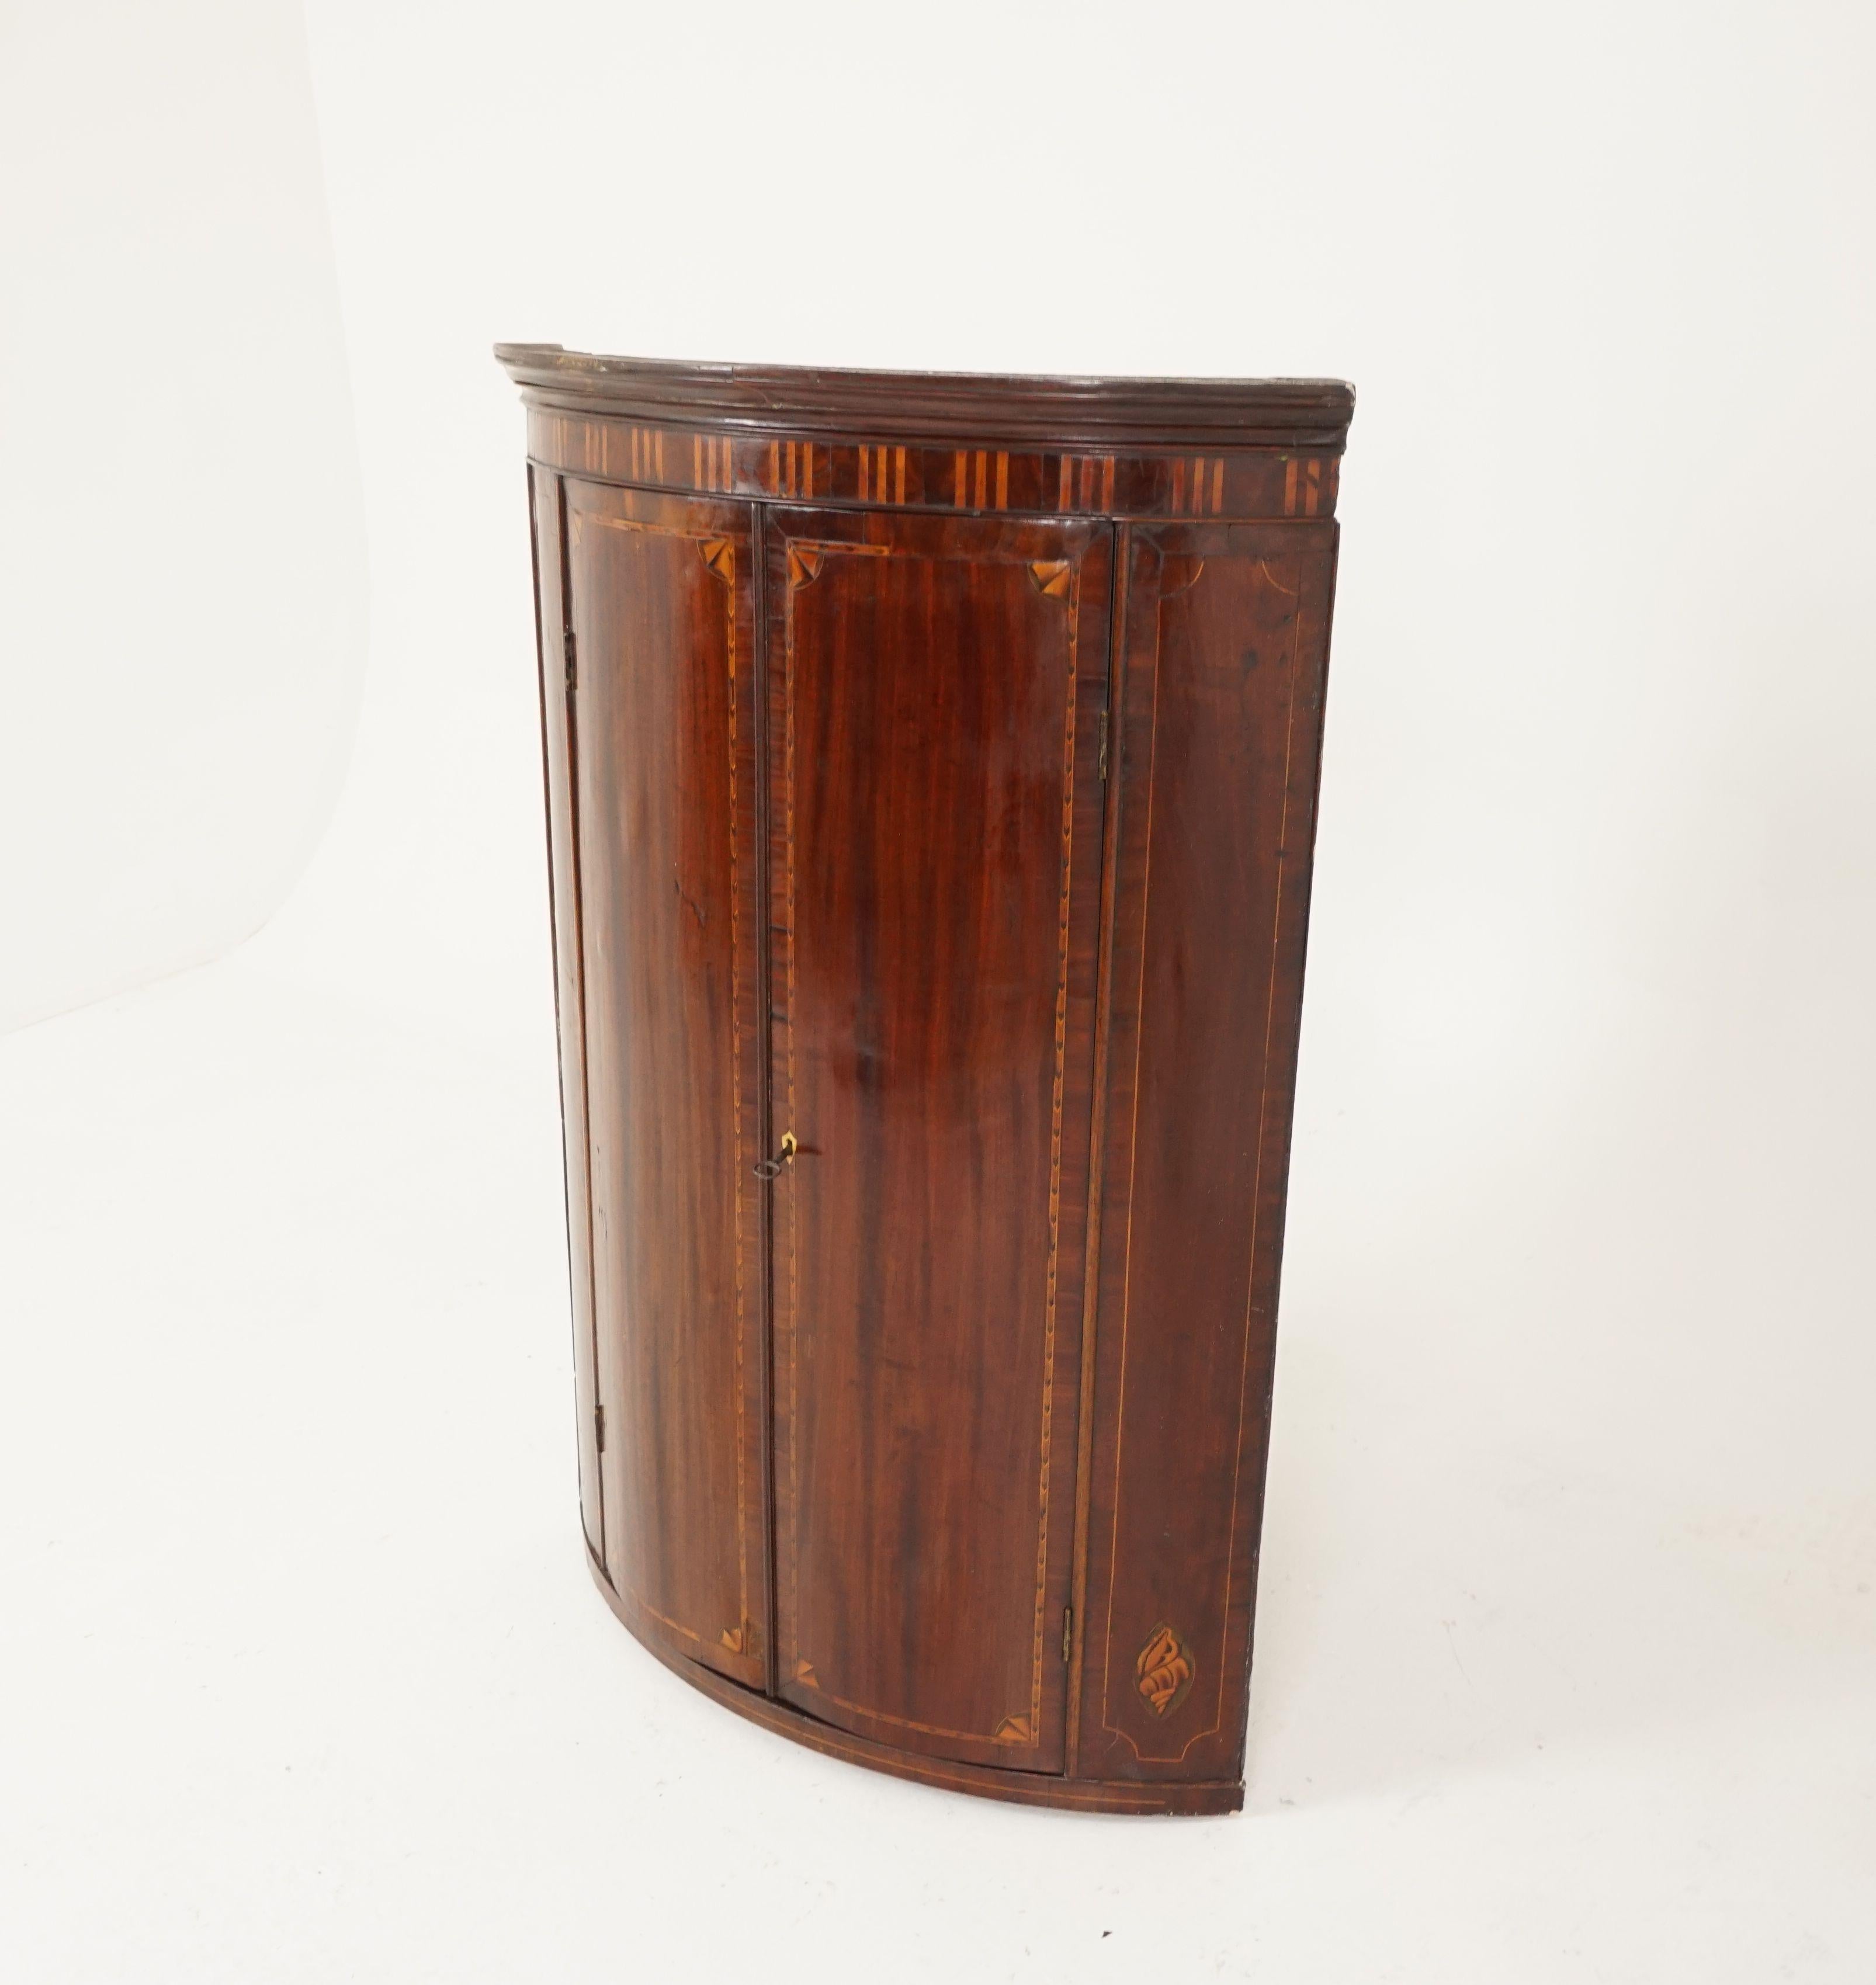 Early 19th Century Antique Hanging Corner Cabinet, Inlaid Walnut, Bow Front, Scotland 1810, H138